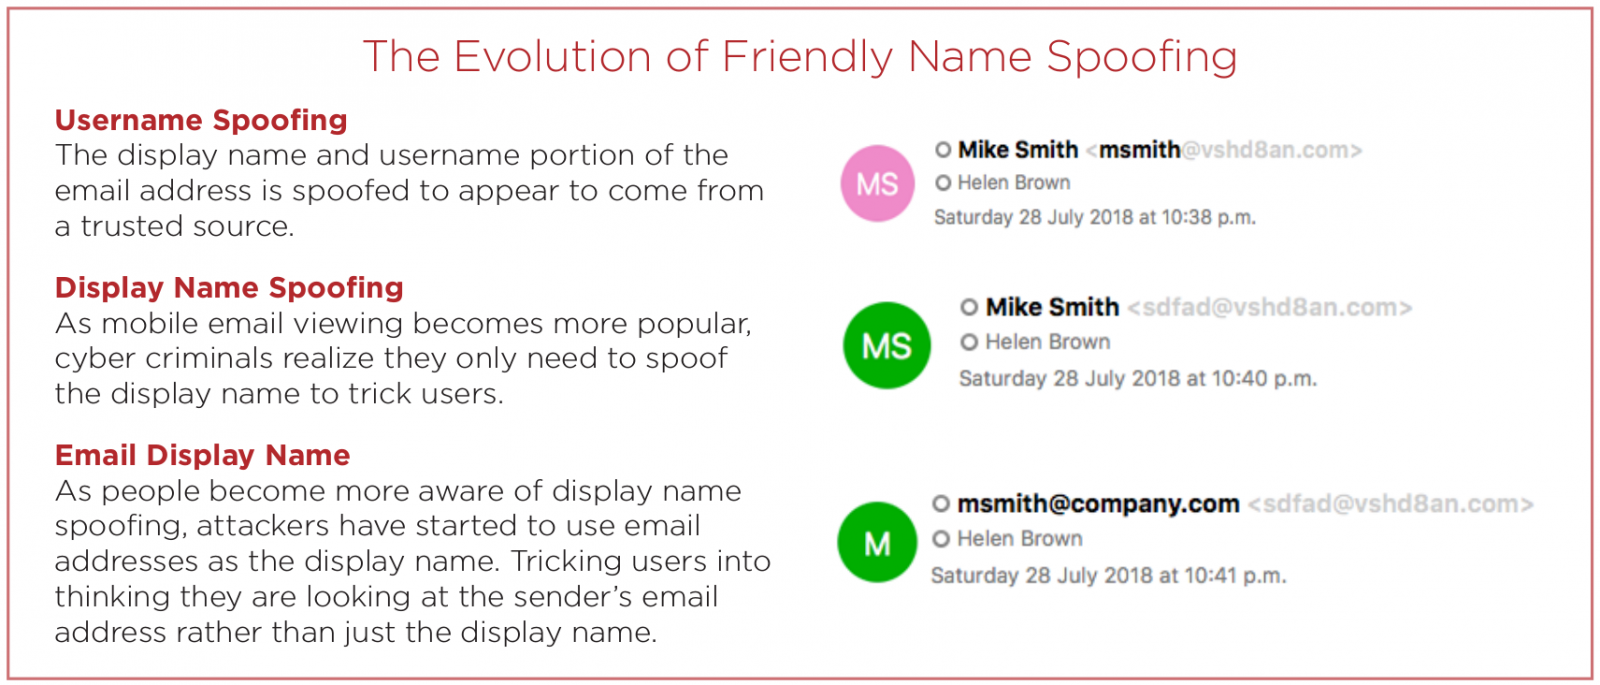 friendly-name-spoofing_evolution